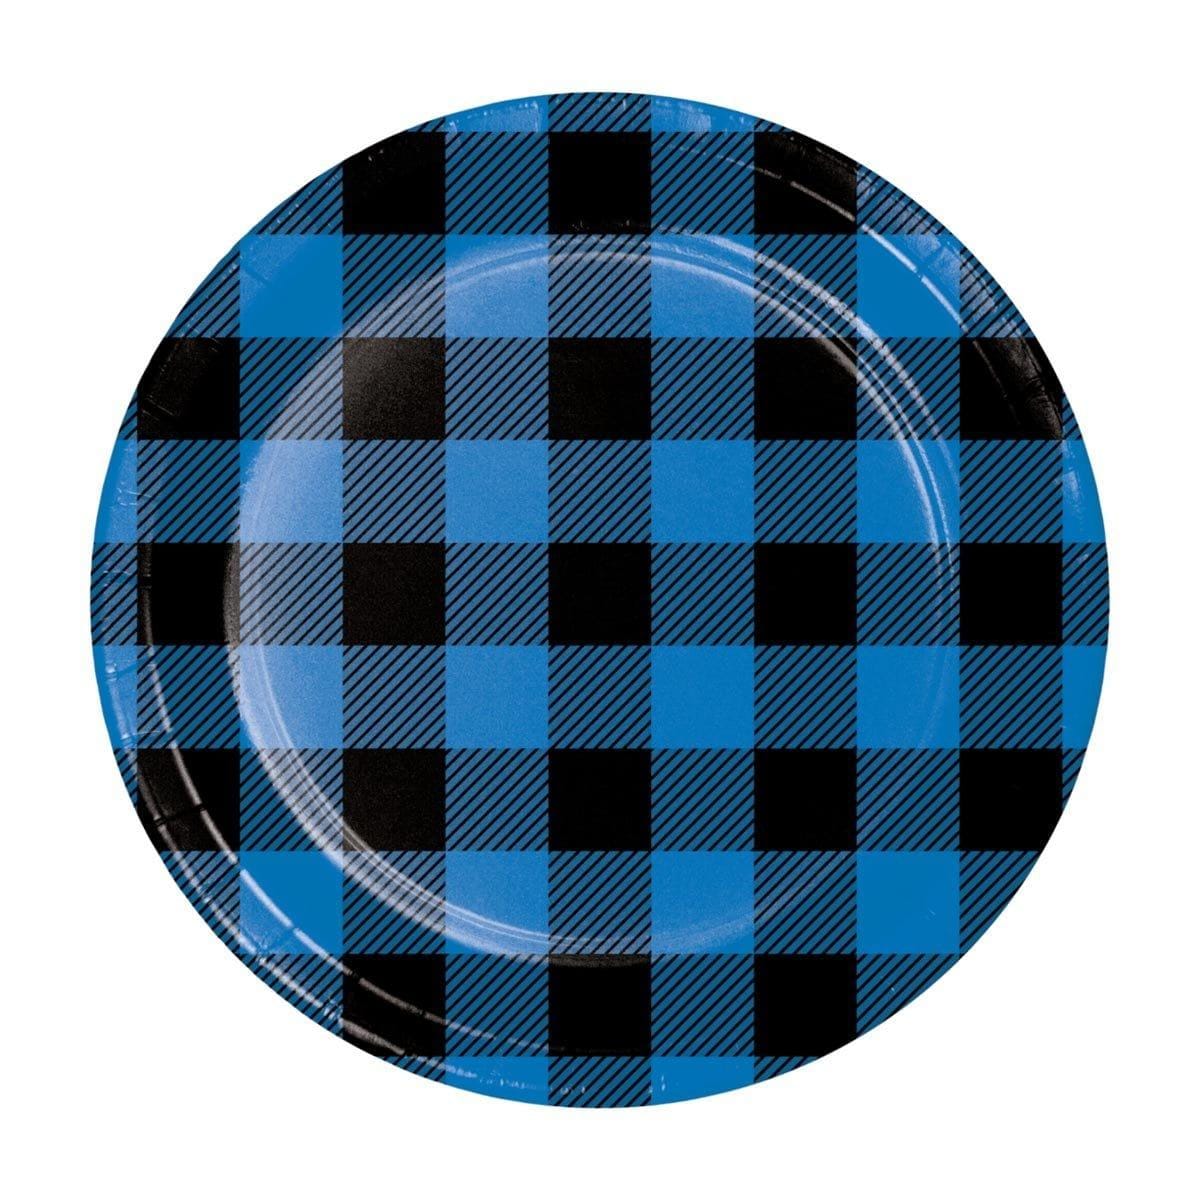 Buy Everyday Entertaining Blue Buffalo Plaid Plates, 7 inches, 8 Count sold at Party Expert